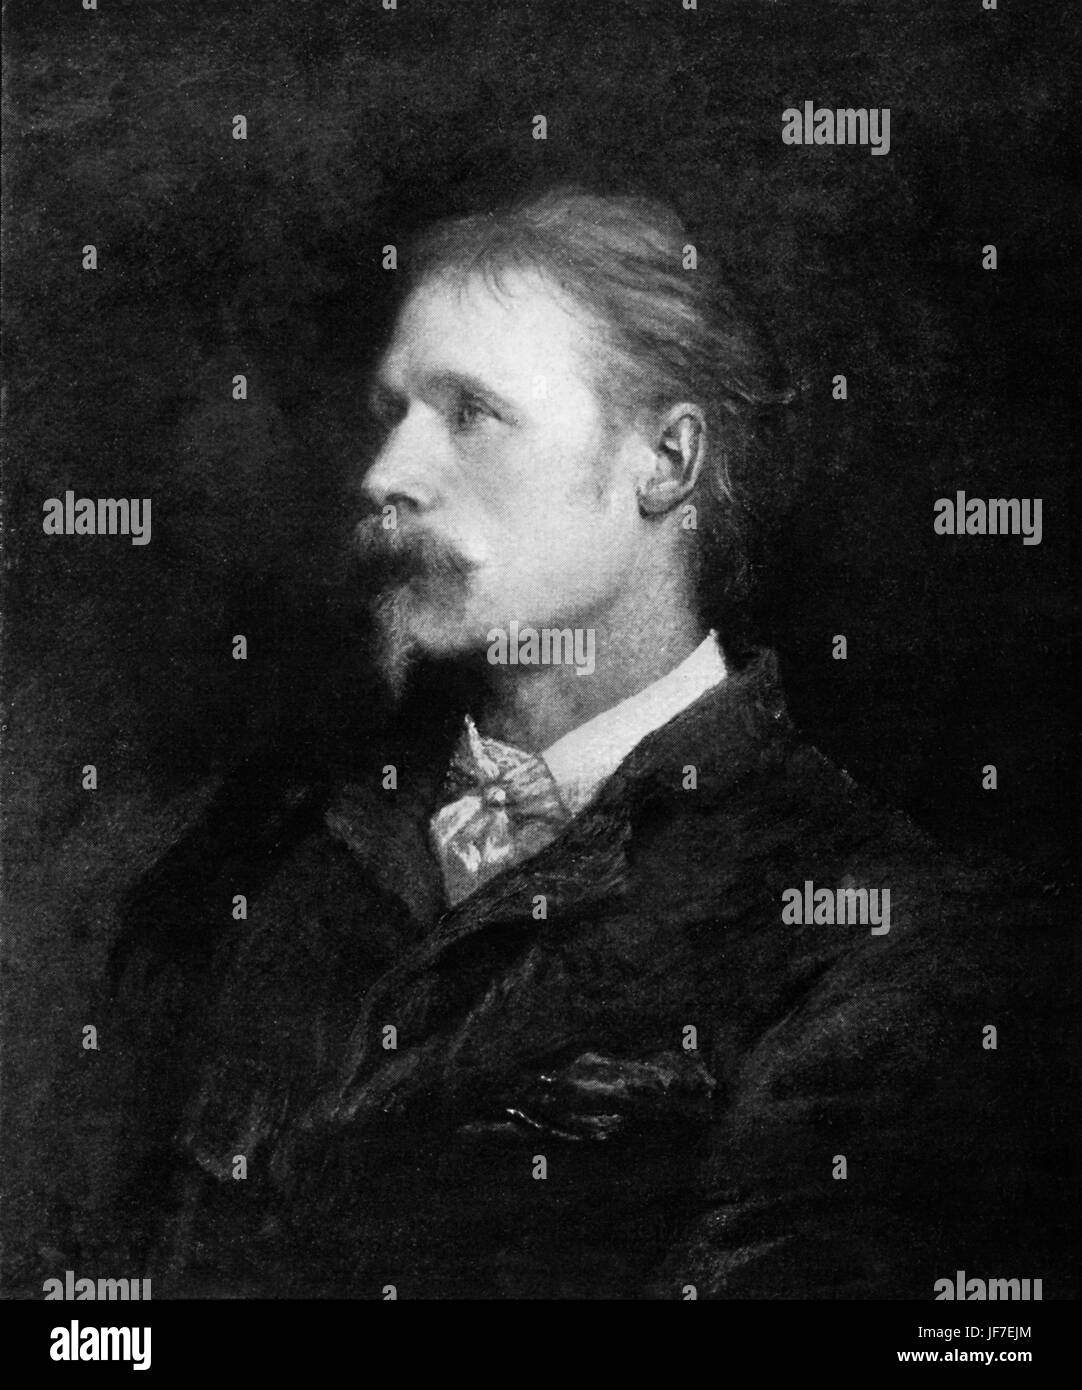 Walter Crane - English artist of Arts and Crafts movement, 15 August  1845 - 14 March   1915. Portrait by George Frederic Watts: 23 February 1817 – 1 July 1904. Stock Photo